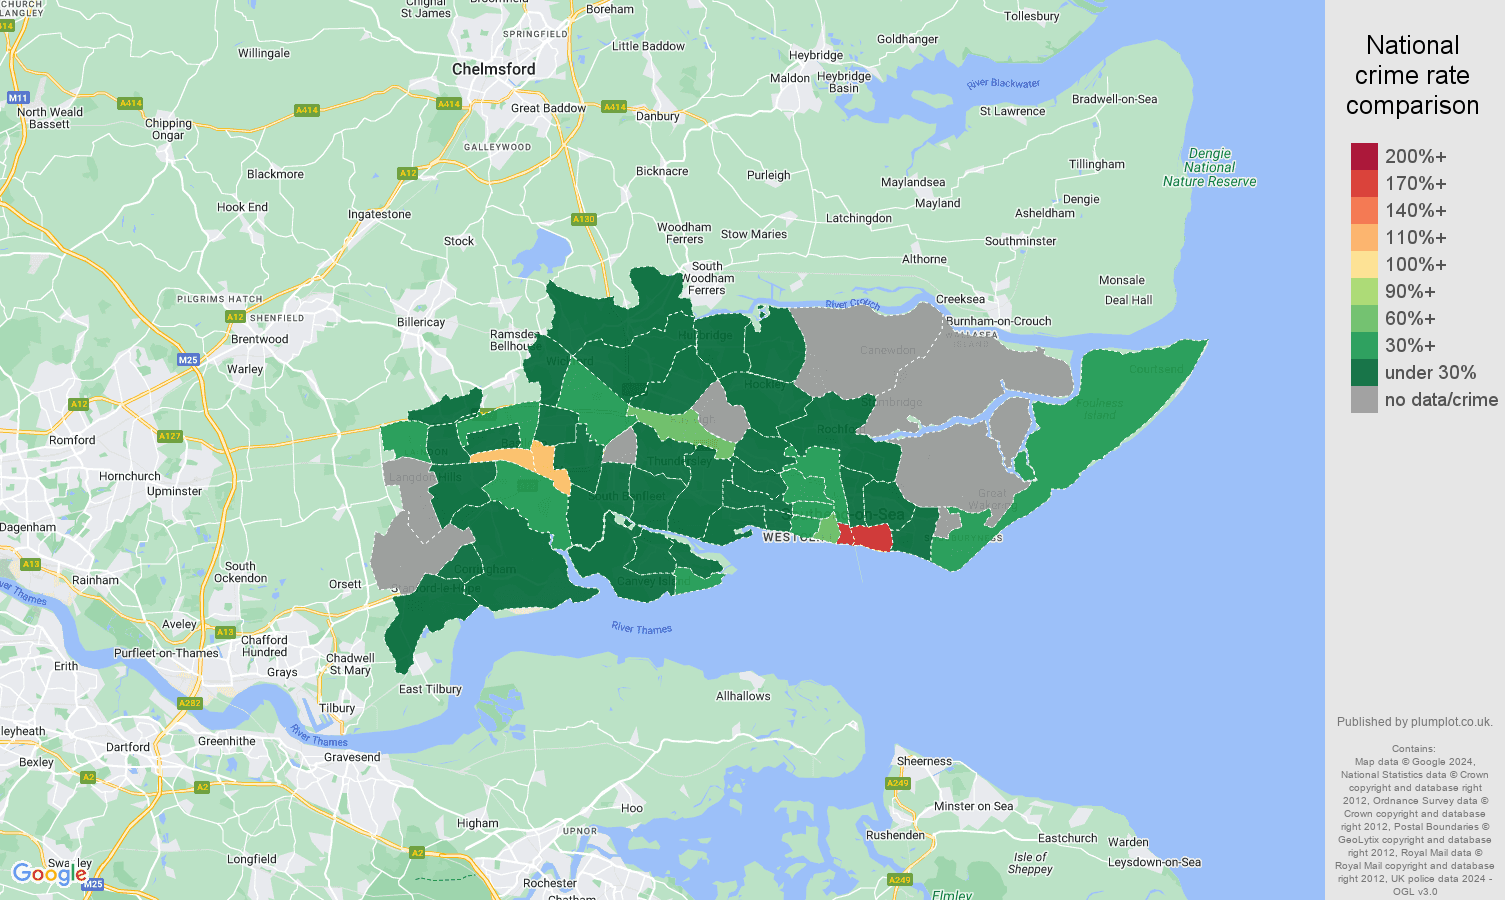 Southend on Sea theft from the person crime rate comparison map